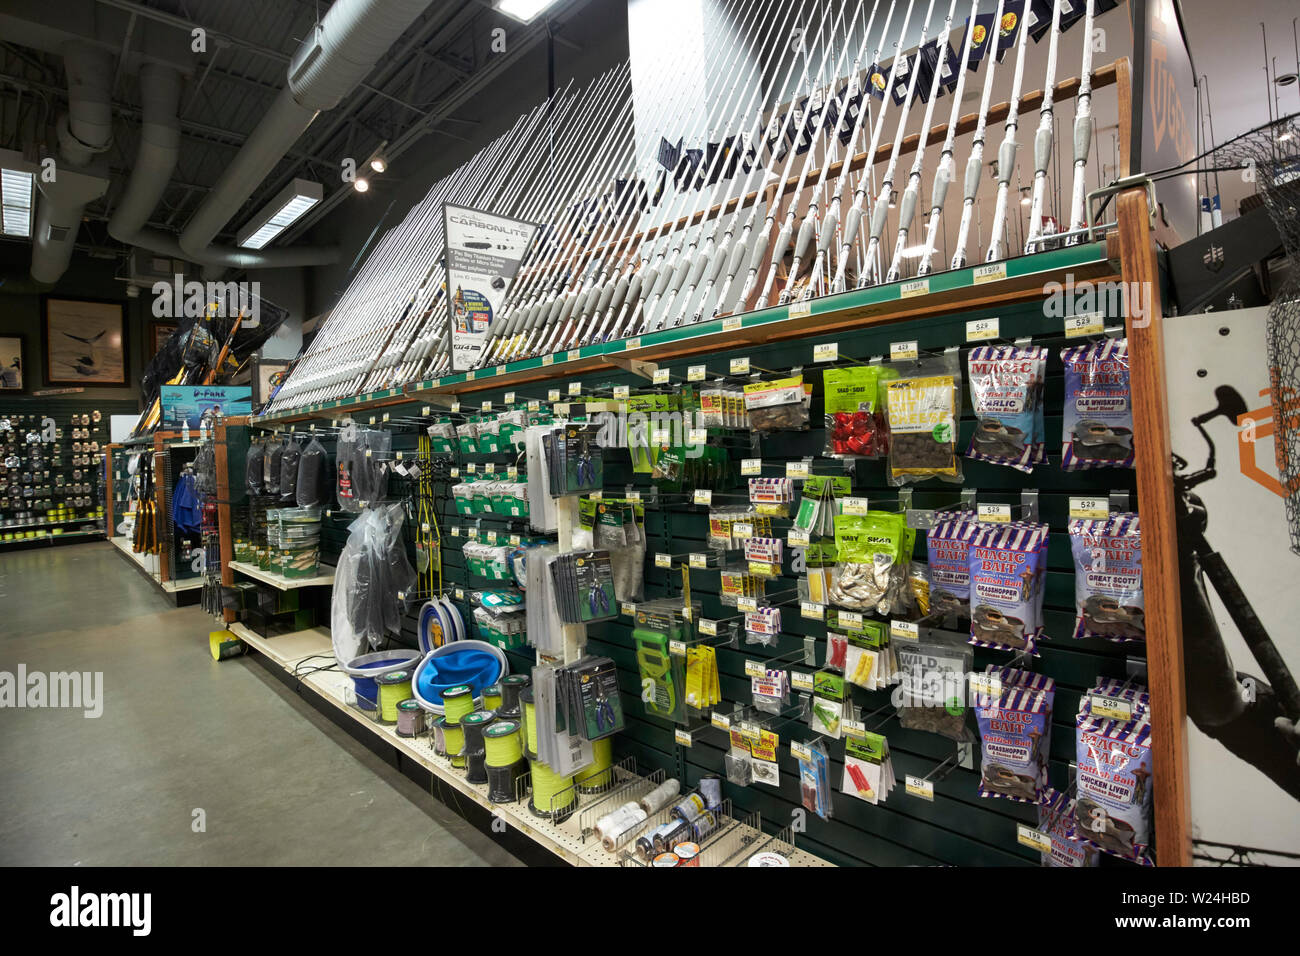 https://c8.alamy.com/comp/W24HBD/fishing-rods-and-equipment-on-sale-in-a-bass-pro-shops-retail-sporting-goods-store-savannah-georgia-usa-W24HBD.jpg